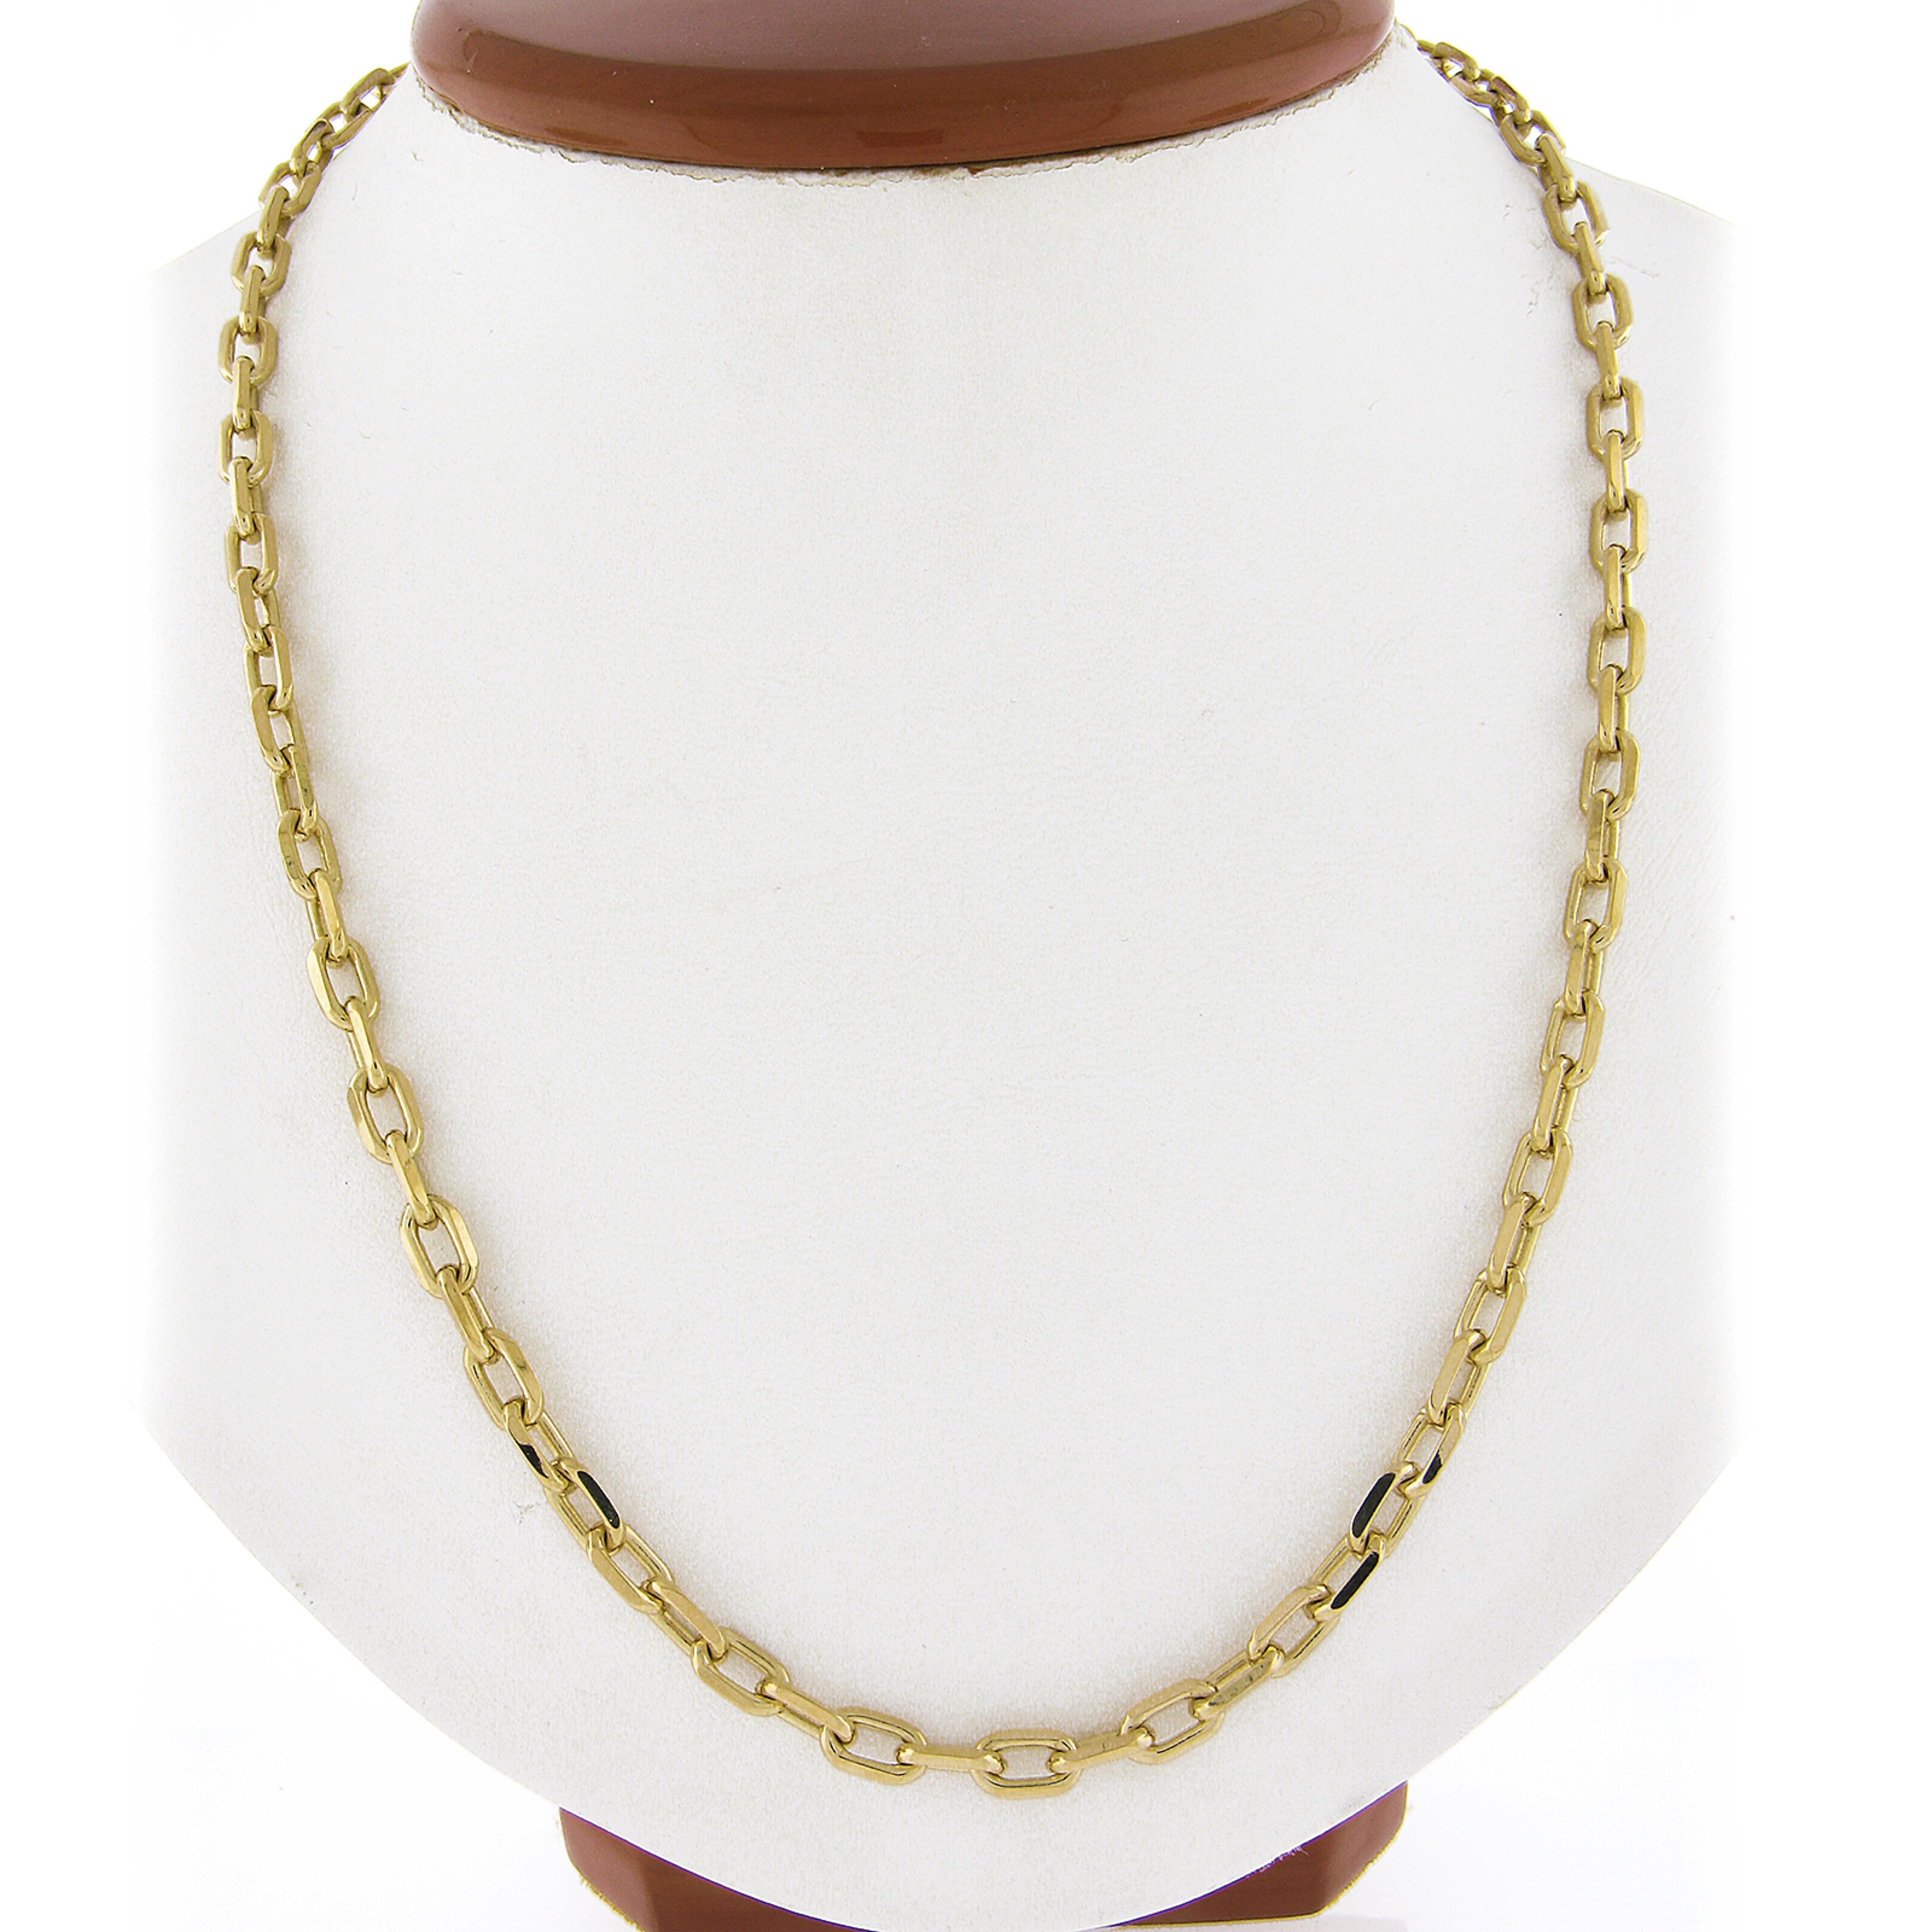 Here we have a beautiful chain necklace that was crafted from solid 18k yellow gold. This chain features well made fancy faceted open cable link with a nice high-polished finish throughout, measuring 18.75 inches in length, and is secured with a